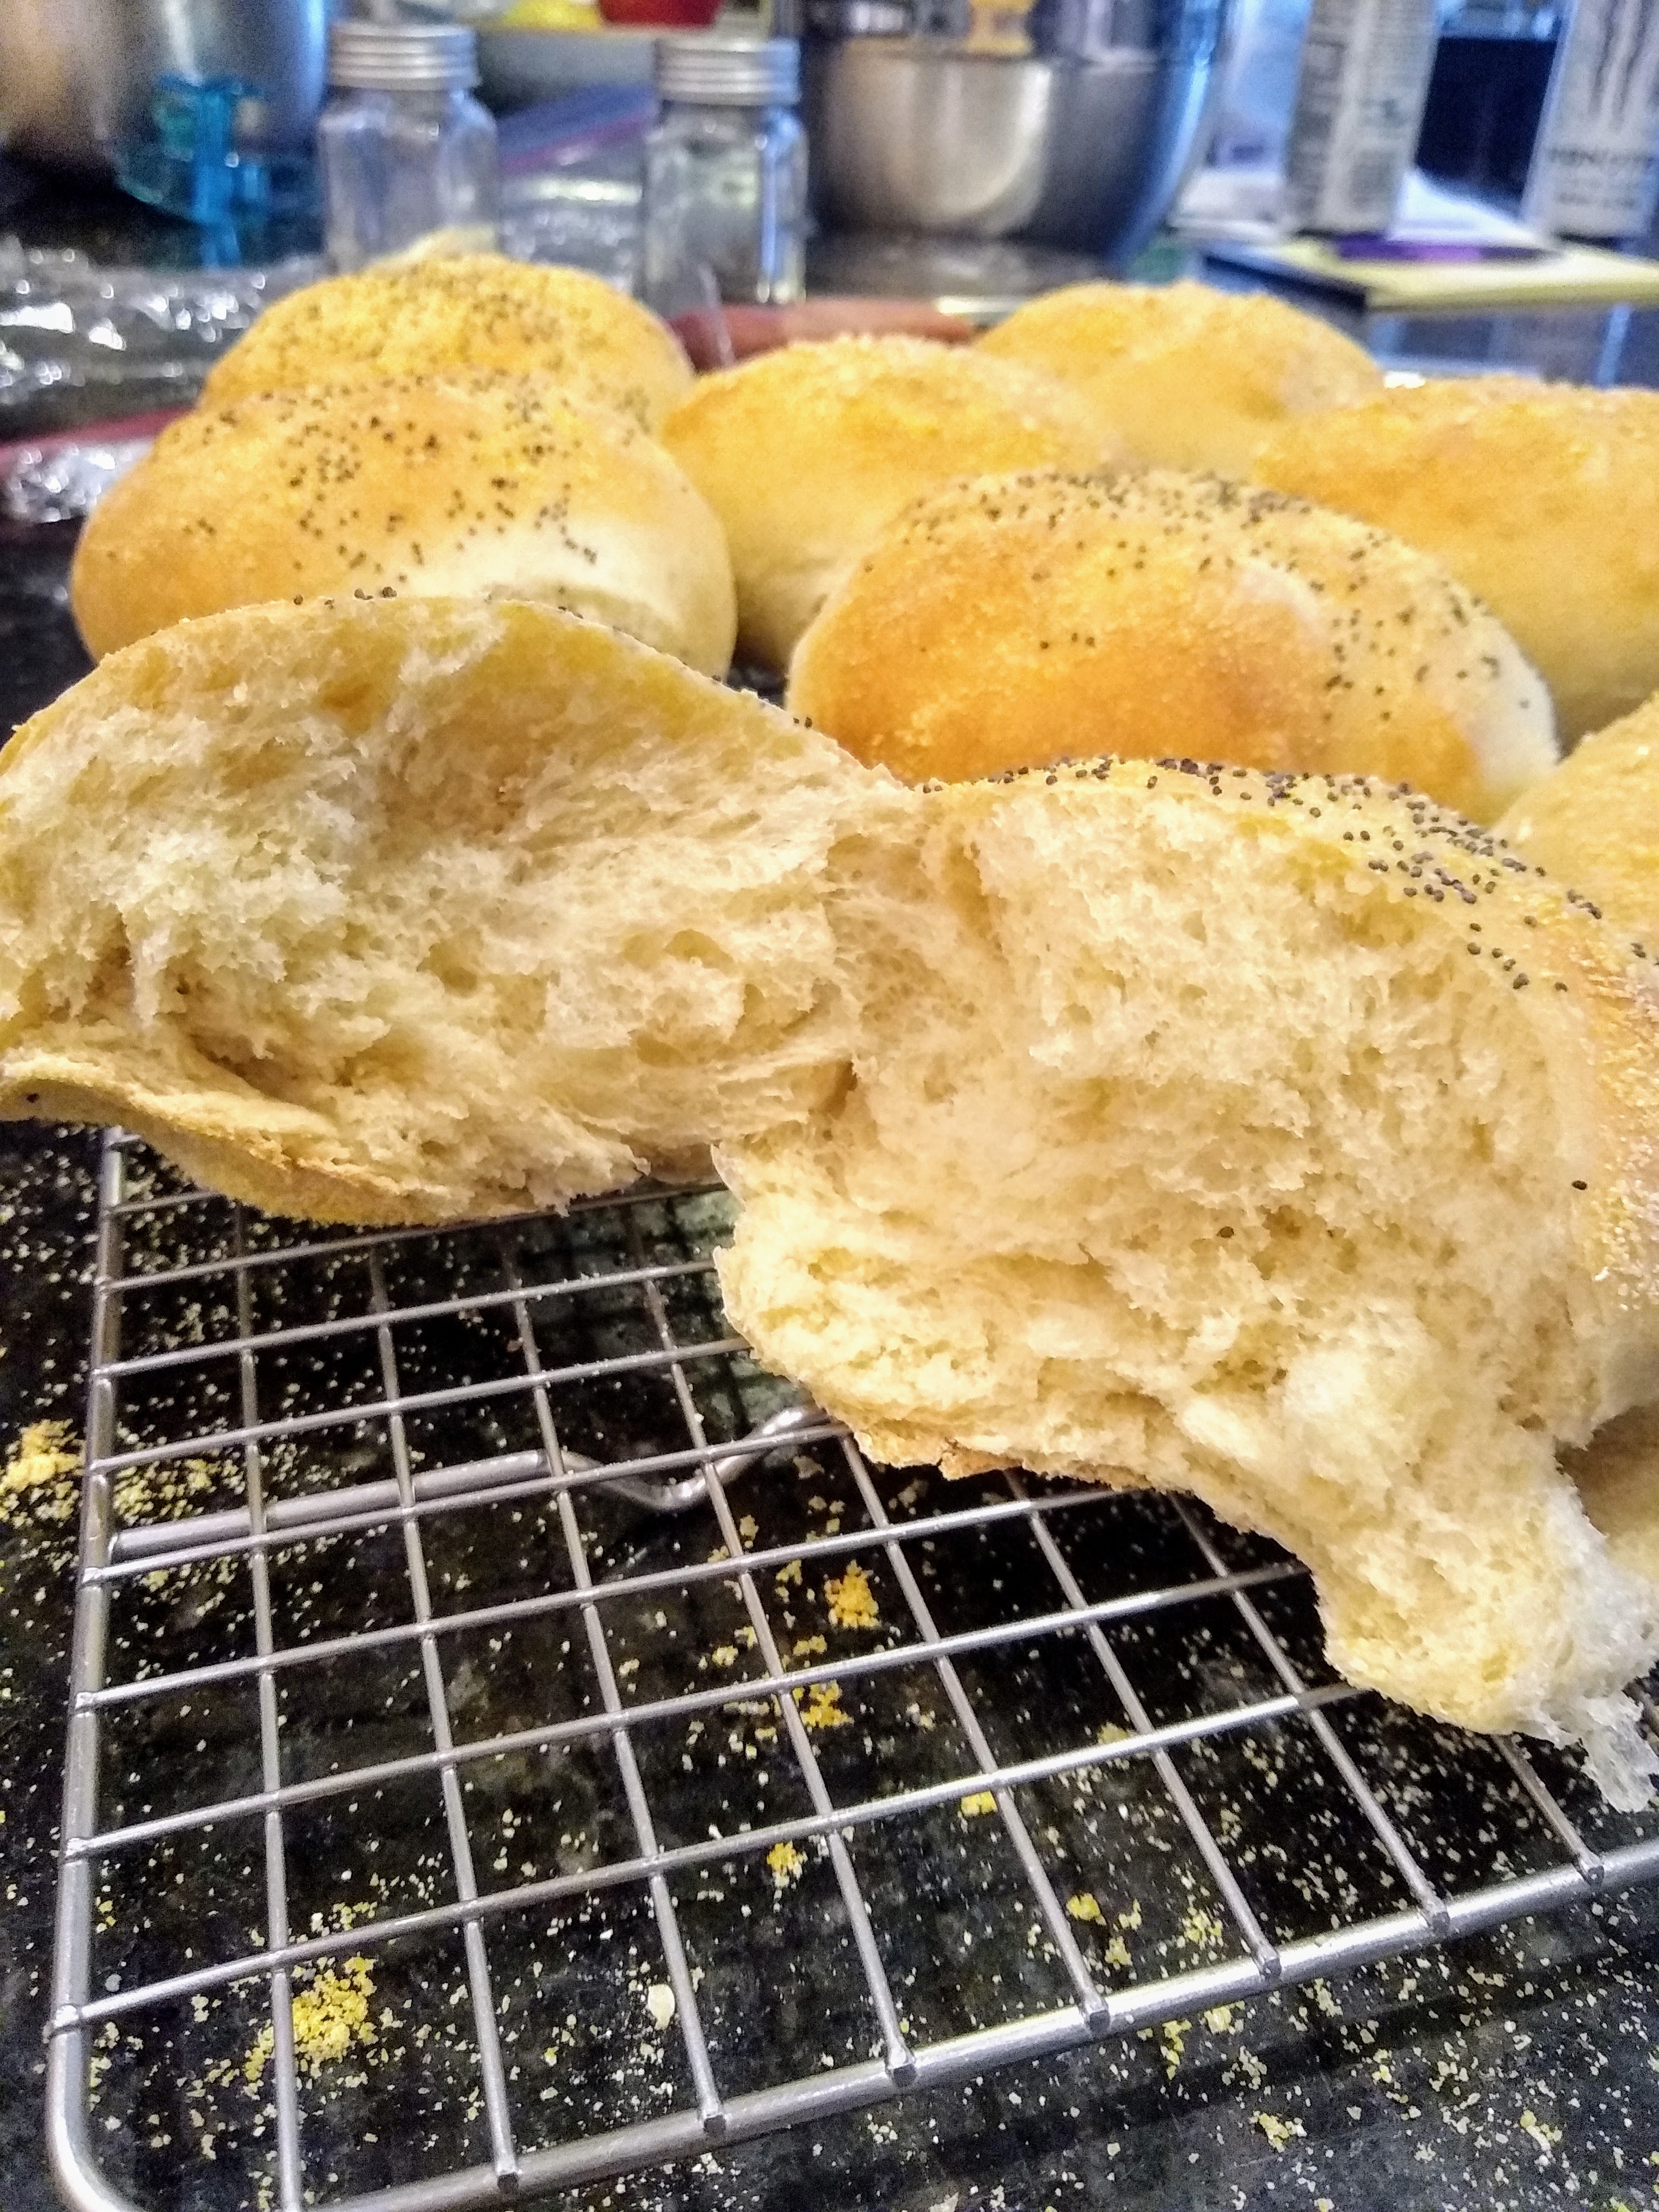 Finished kaiser buns, with crumb